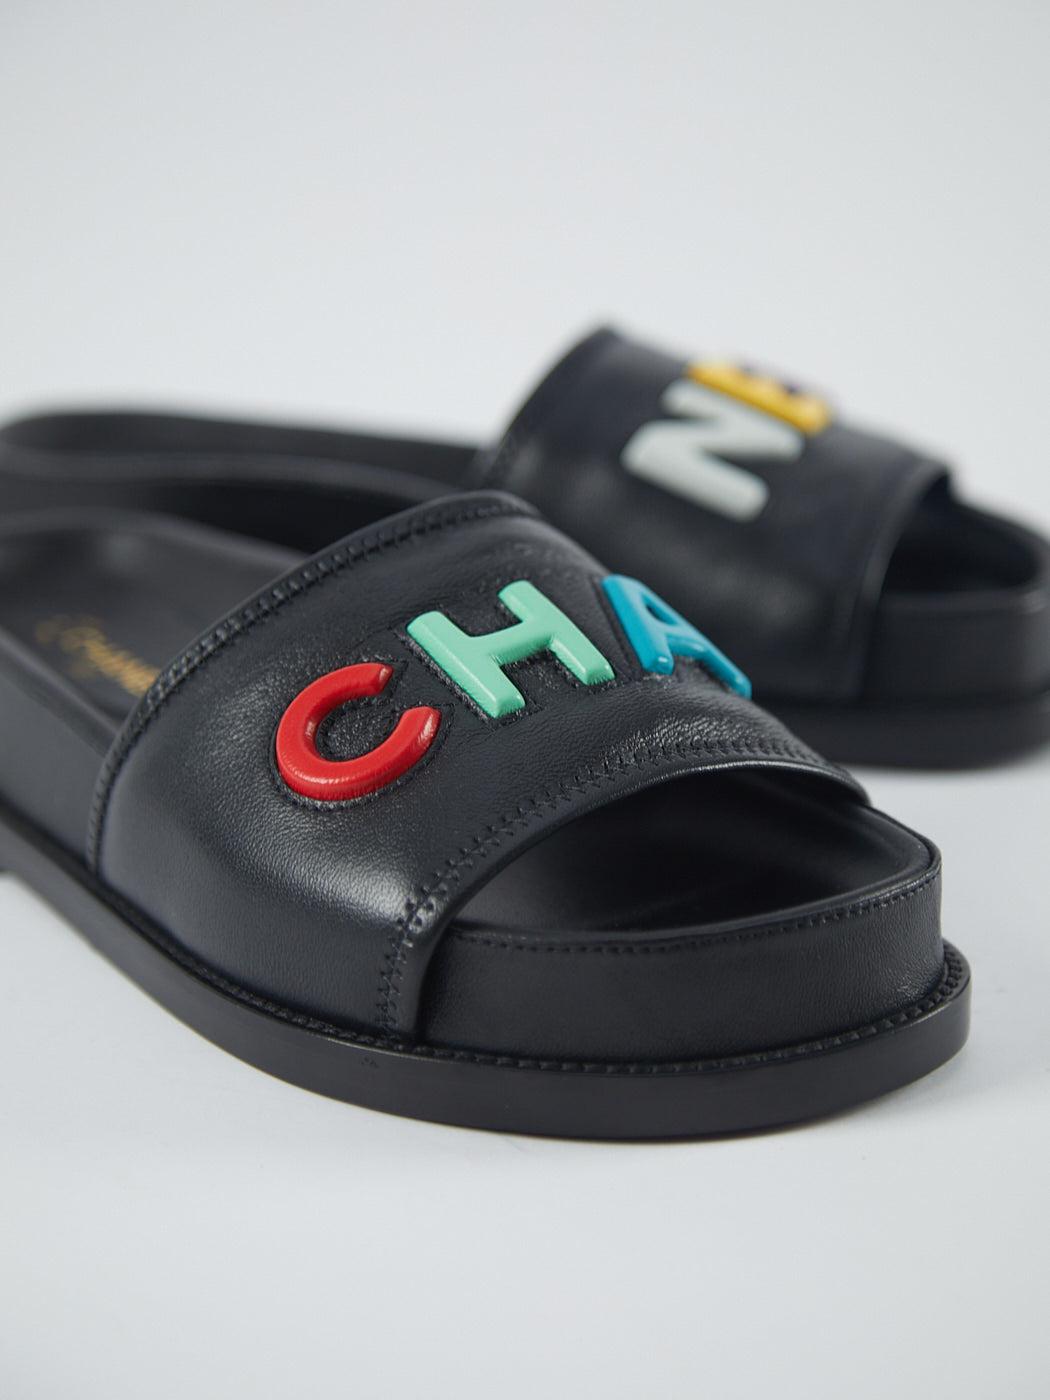 Chanel Slide Sandals in Black with Multicolour Logo

Lambskin Leather

Heel height: 10m

Size 37

*Imperfect box

